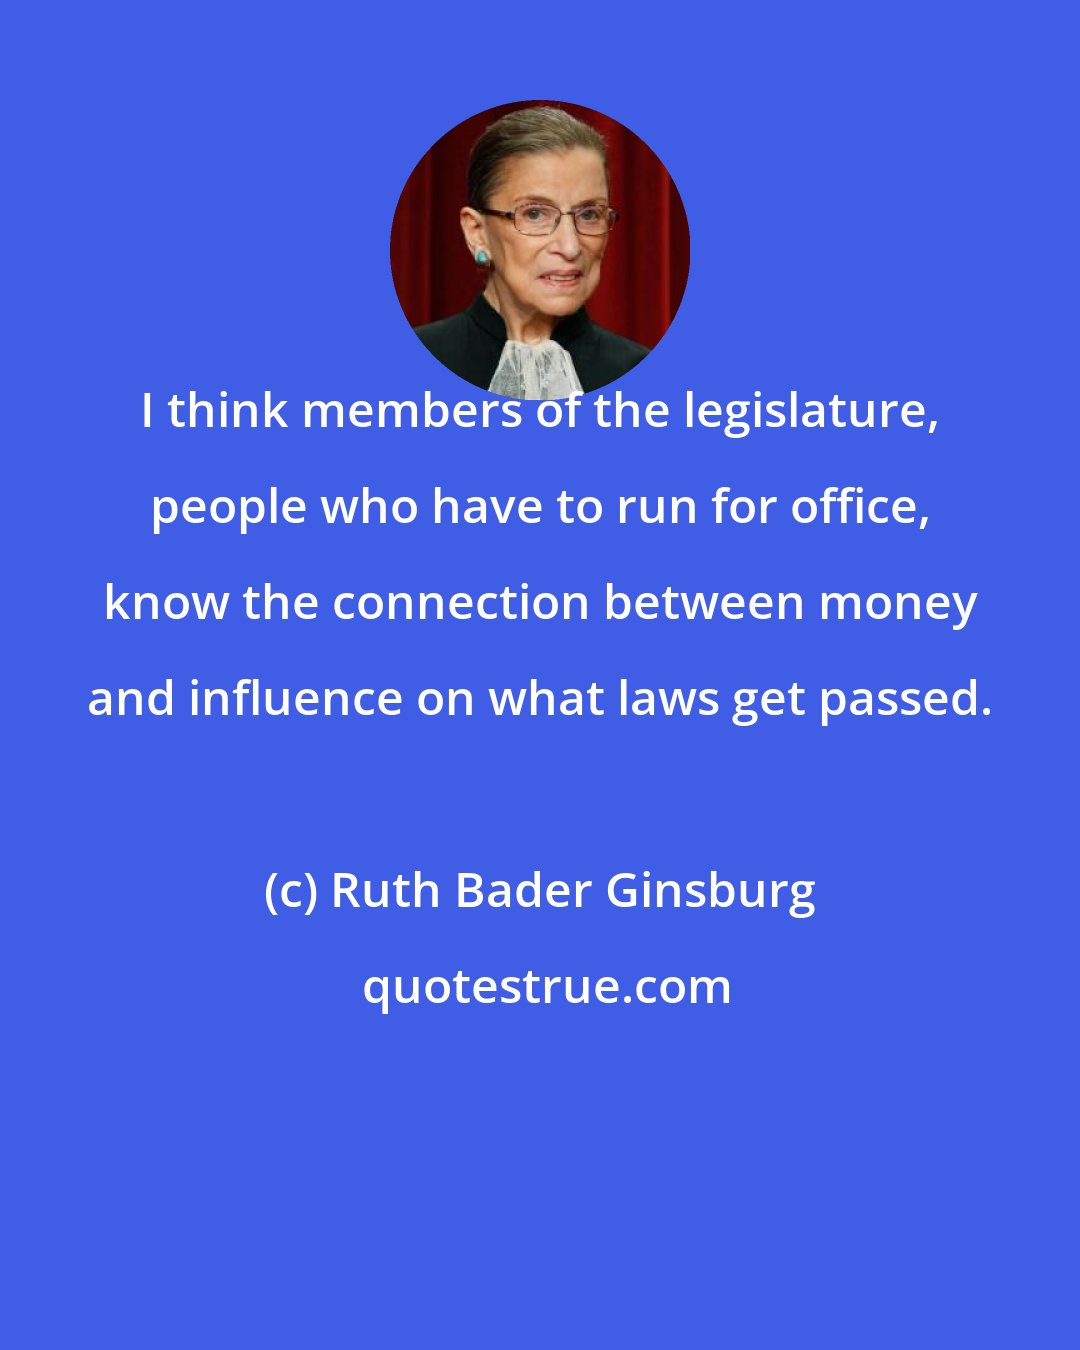 Ruth Bader Ginsburg: I think members of the legislature, people who have to run for office, know the connection between money and influence on what laws get passed.